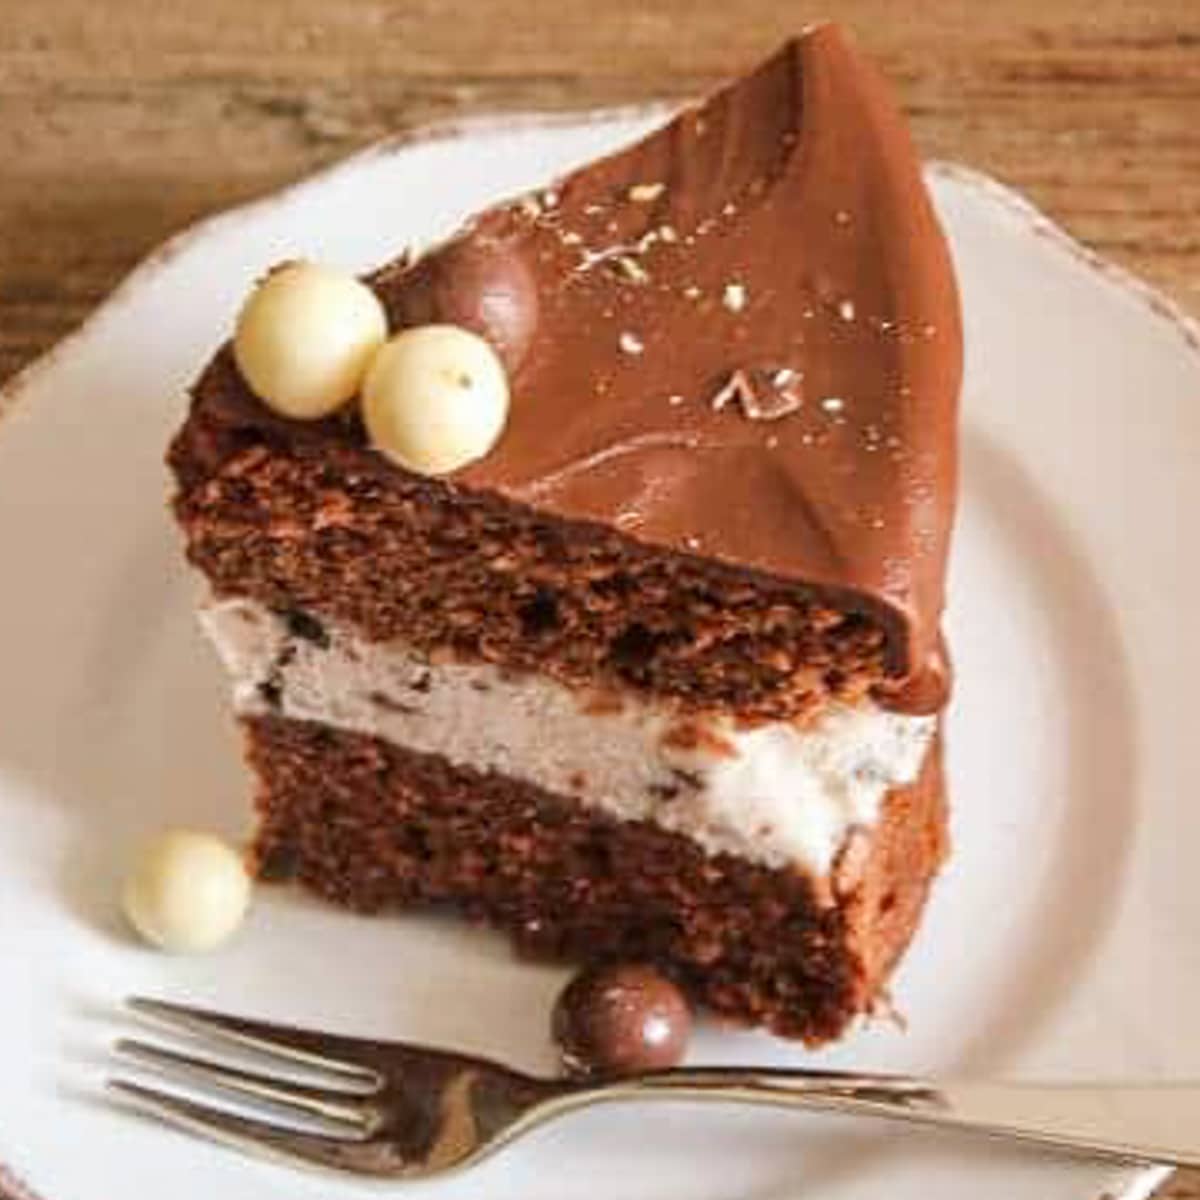 A slice of cake on a white plate.